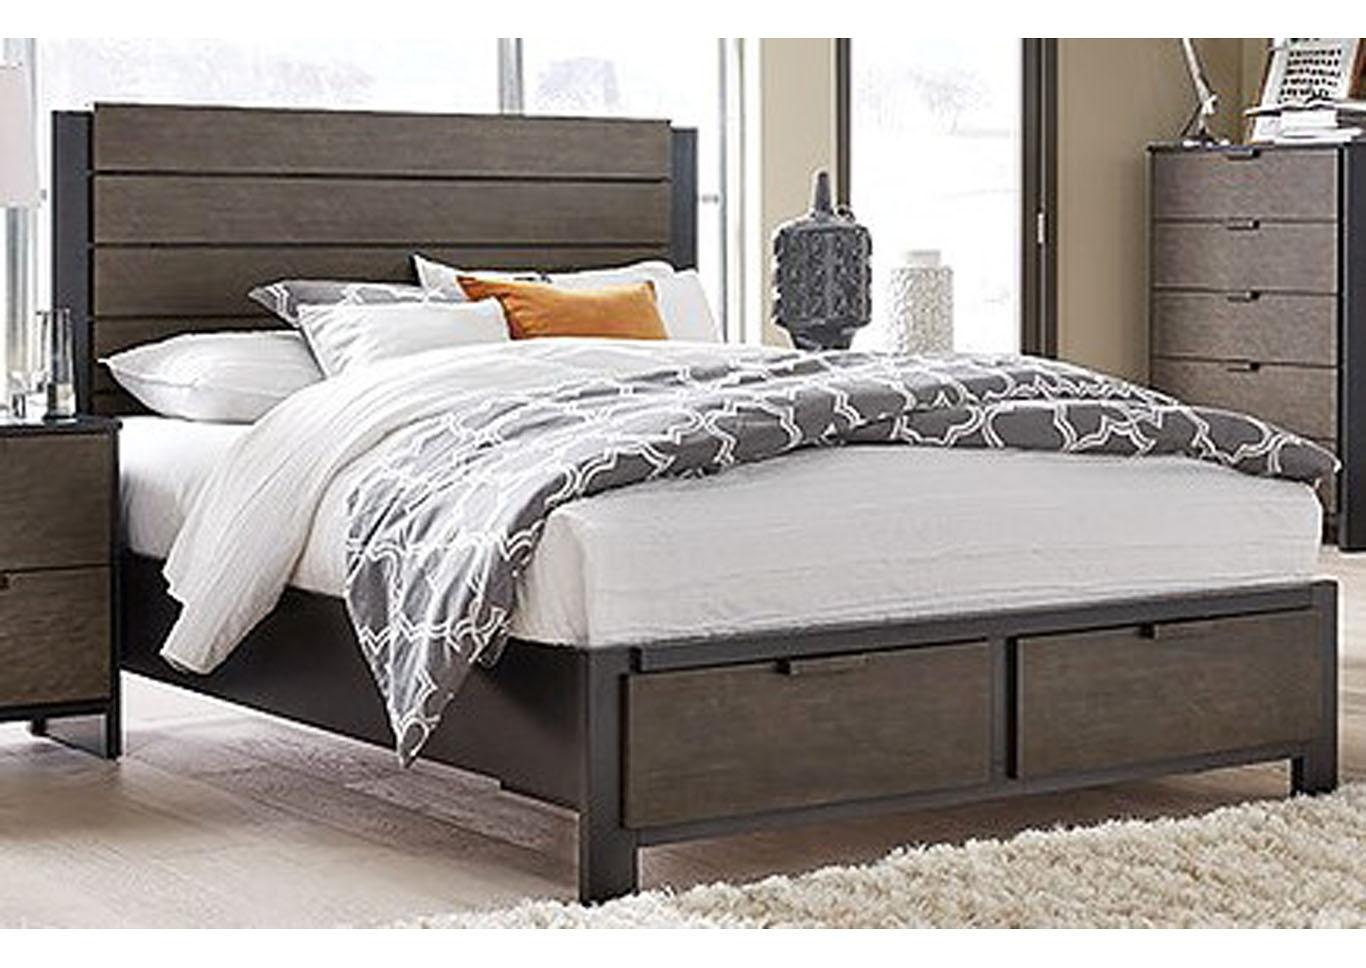 Paxton Storage Platform Bed, Cal King Wood Bed Frame With Storage